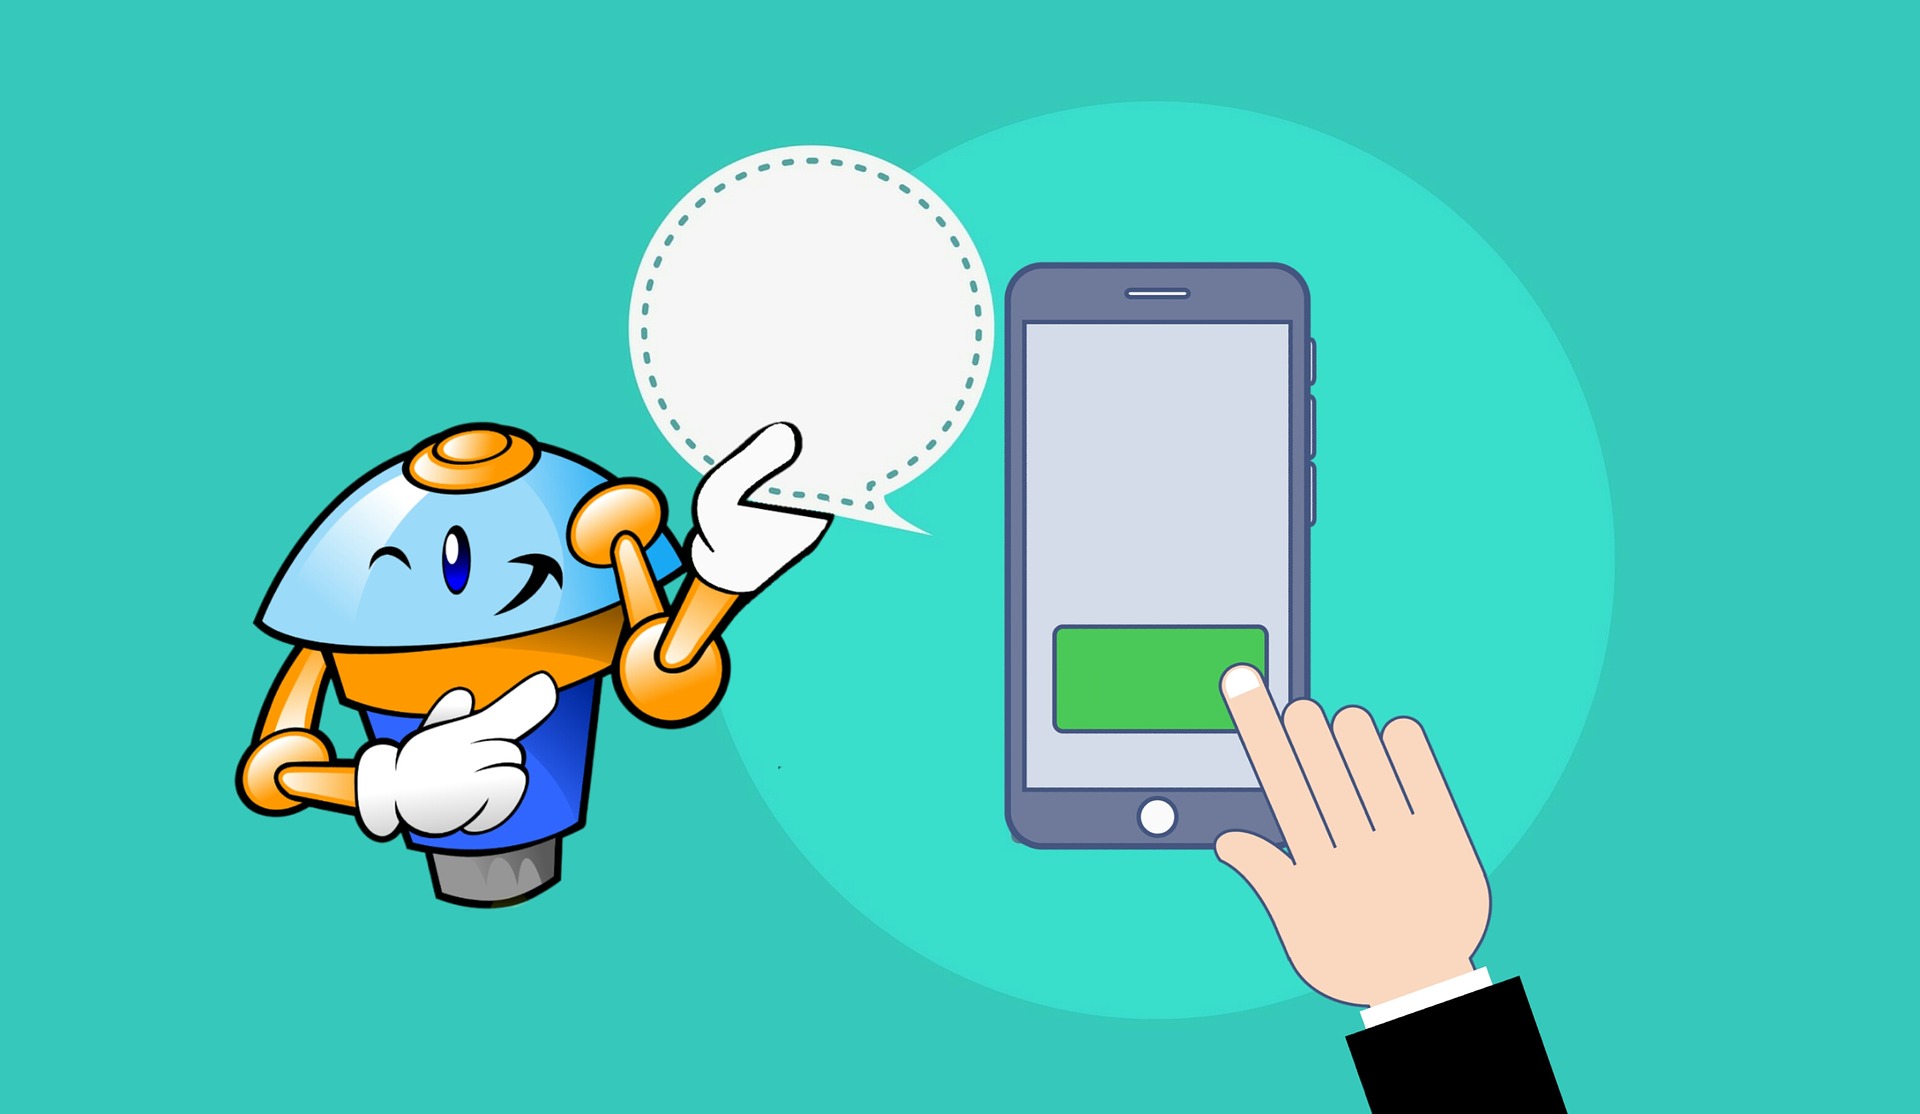 Take care of customer service tasks with chatbots